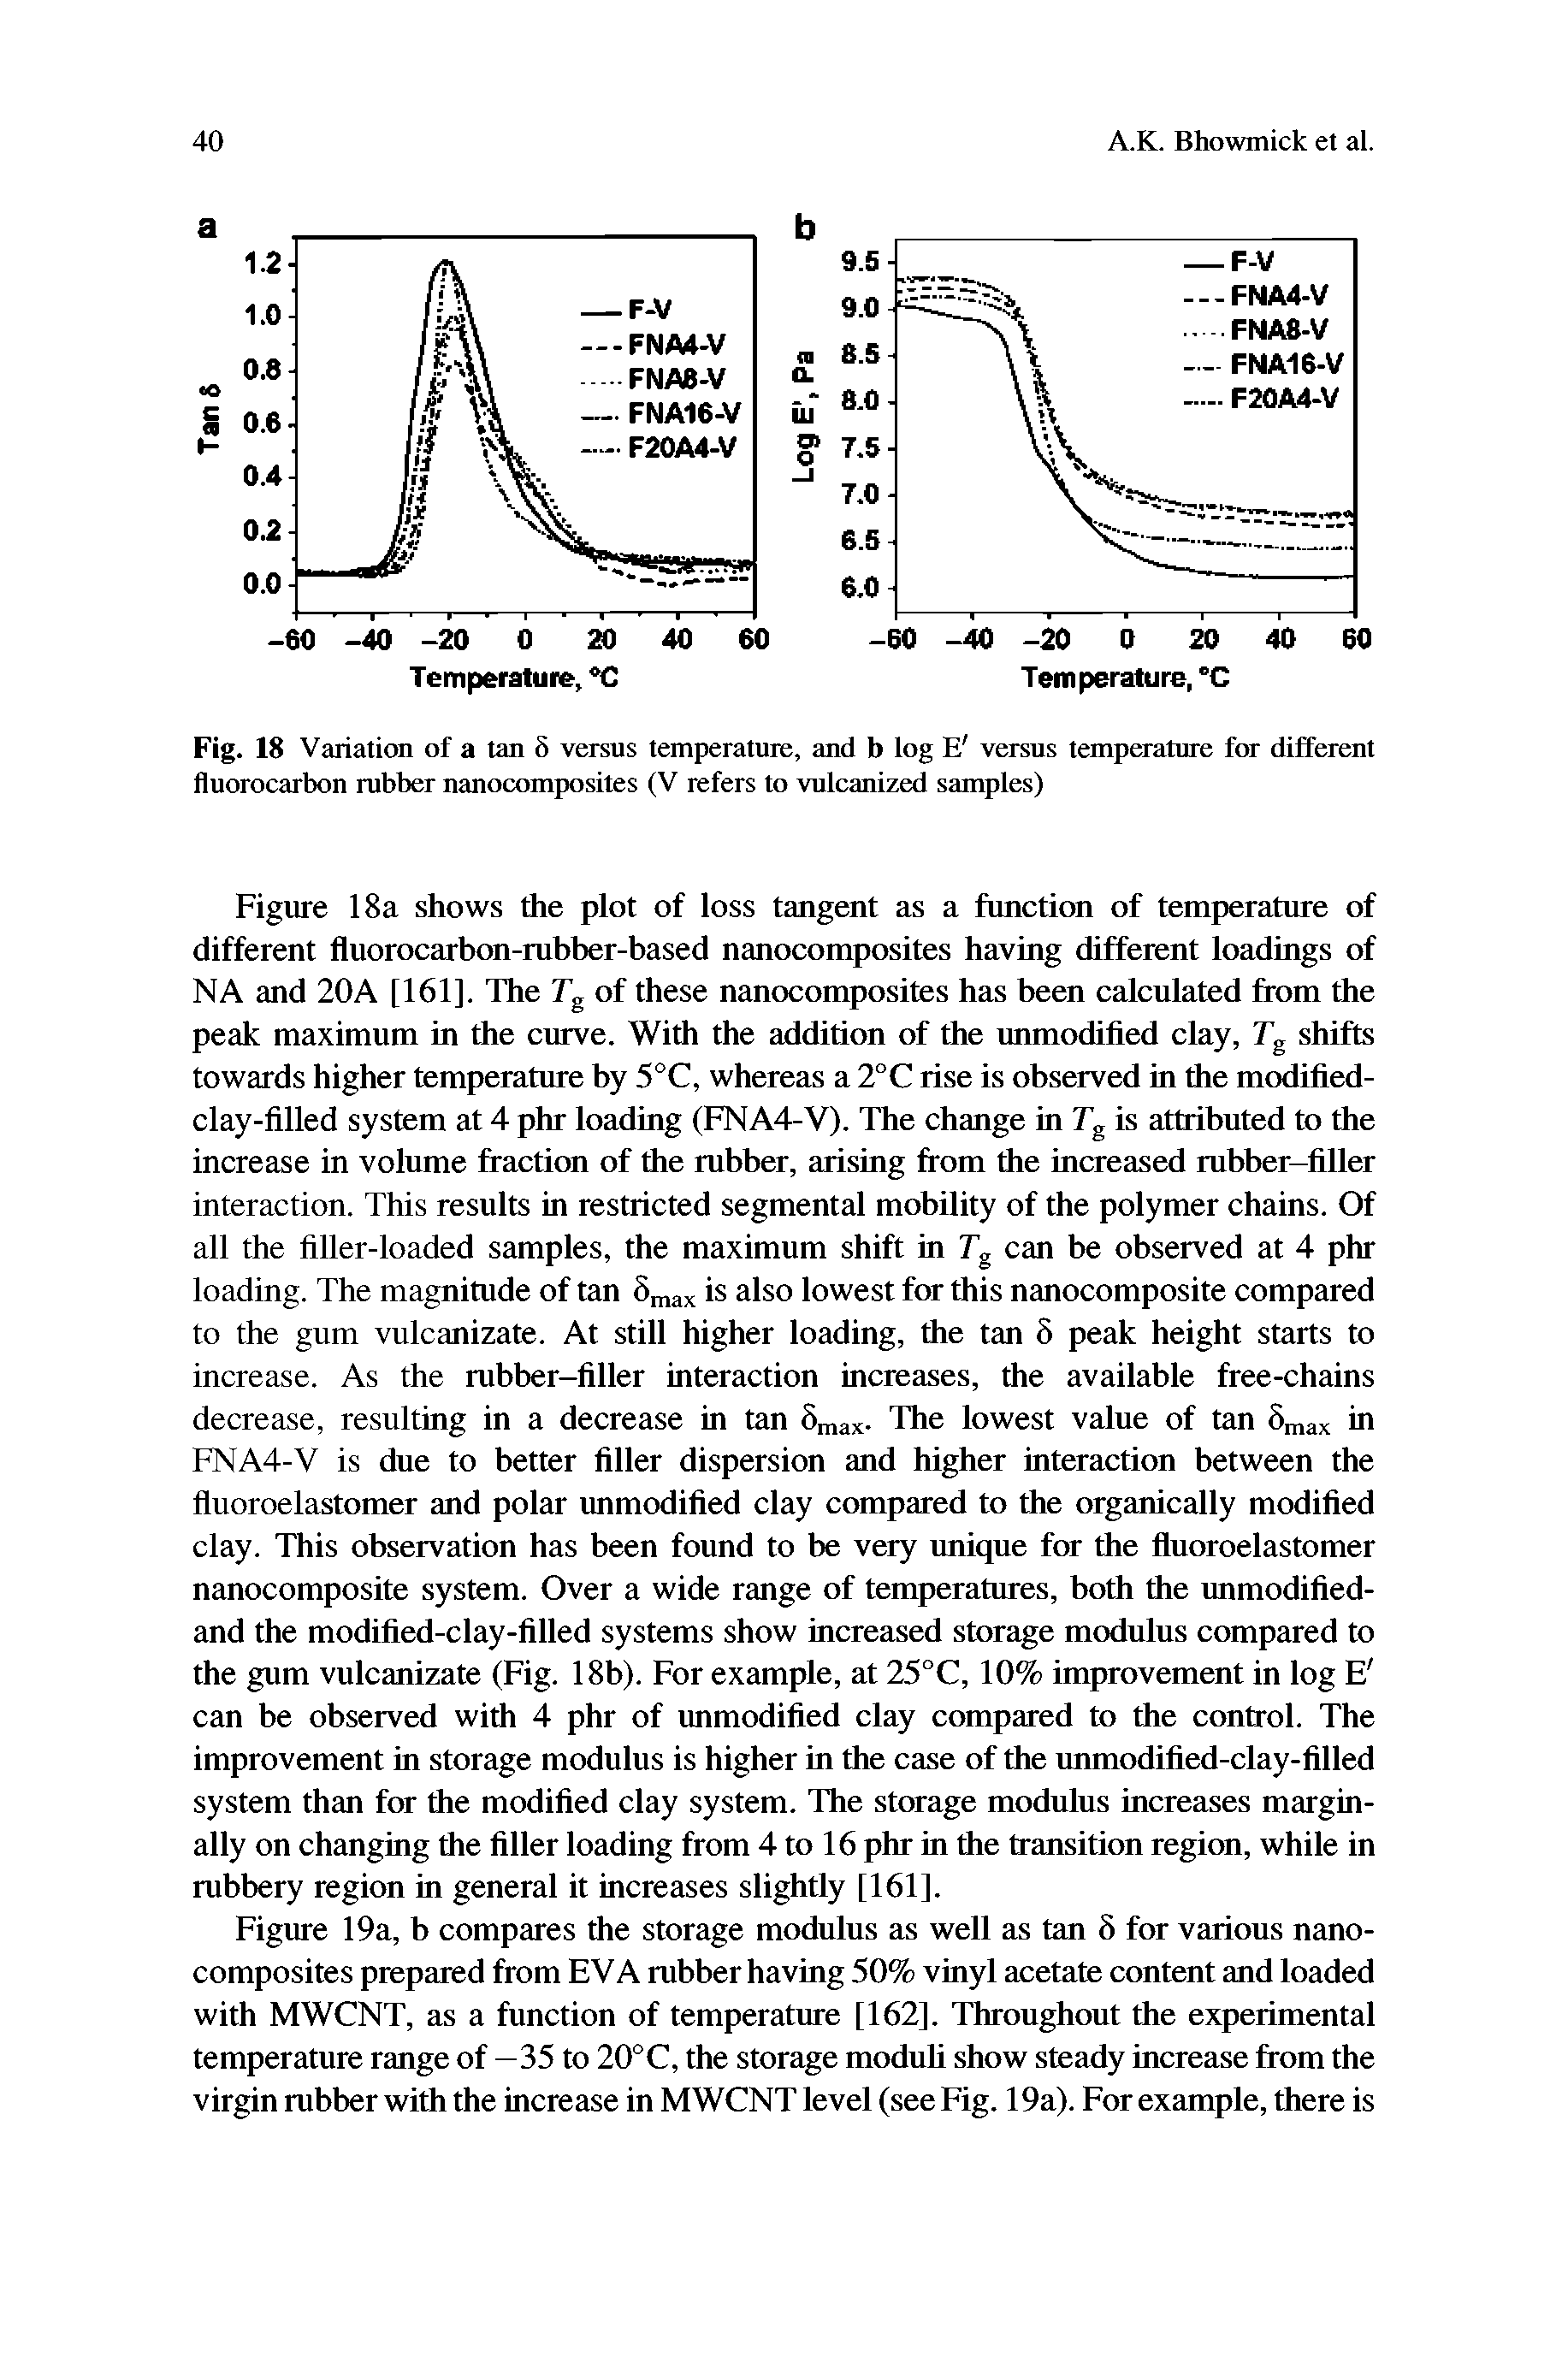 Figure 19a, b compares the storage modulus as well as tan 8 for various nanocomposites prepared from EVA rubber having 50% vinyl acetate content and loaded with MWCNT, as a function of temperature [162]. Throughout the experimental temperature range of —35 to 20°C, the storage moduli show steady increase from the virgin rubber with the increase in MWCNT level (see Fig. 19a). For example, there is...